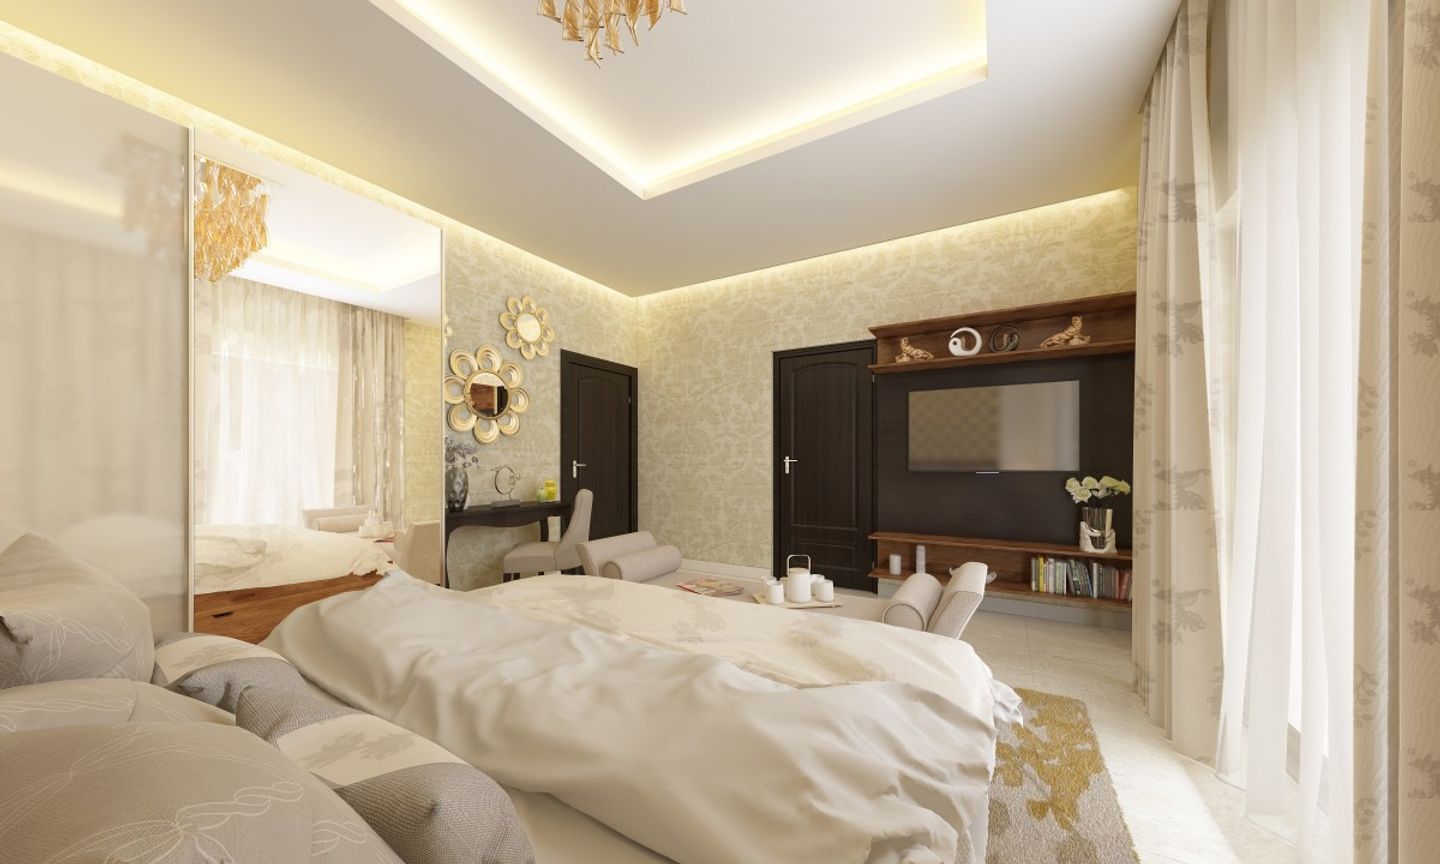 Spacious Master Bedroom Design With Wallpaper And Wall Design